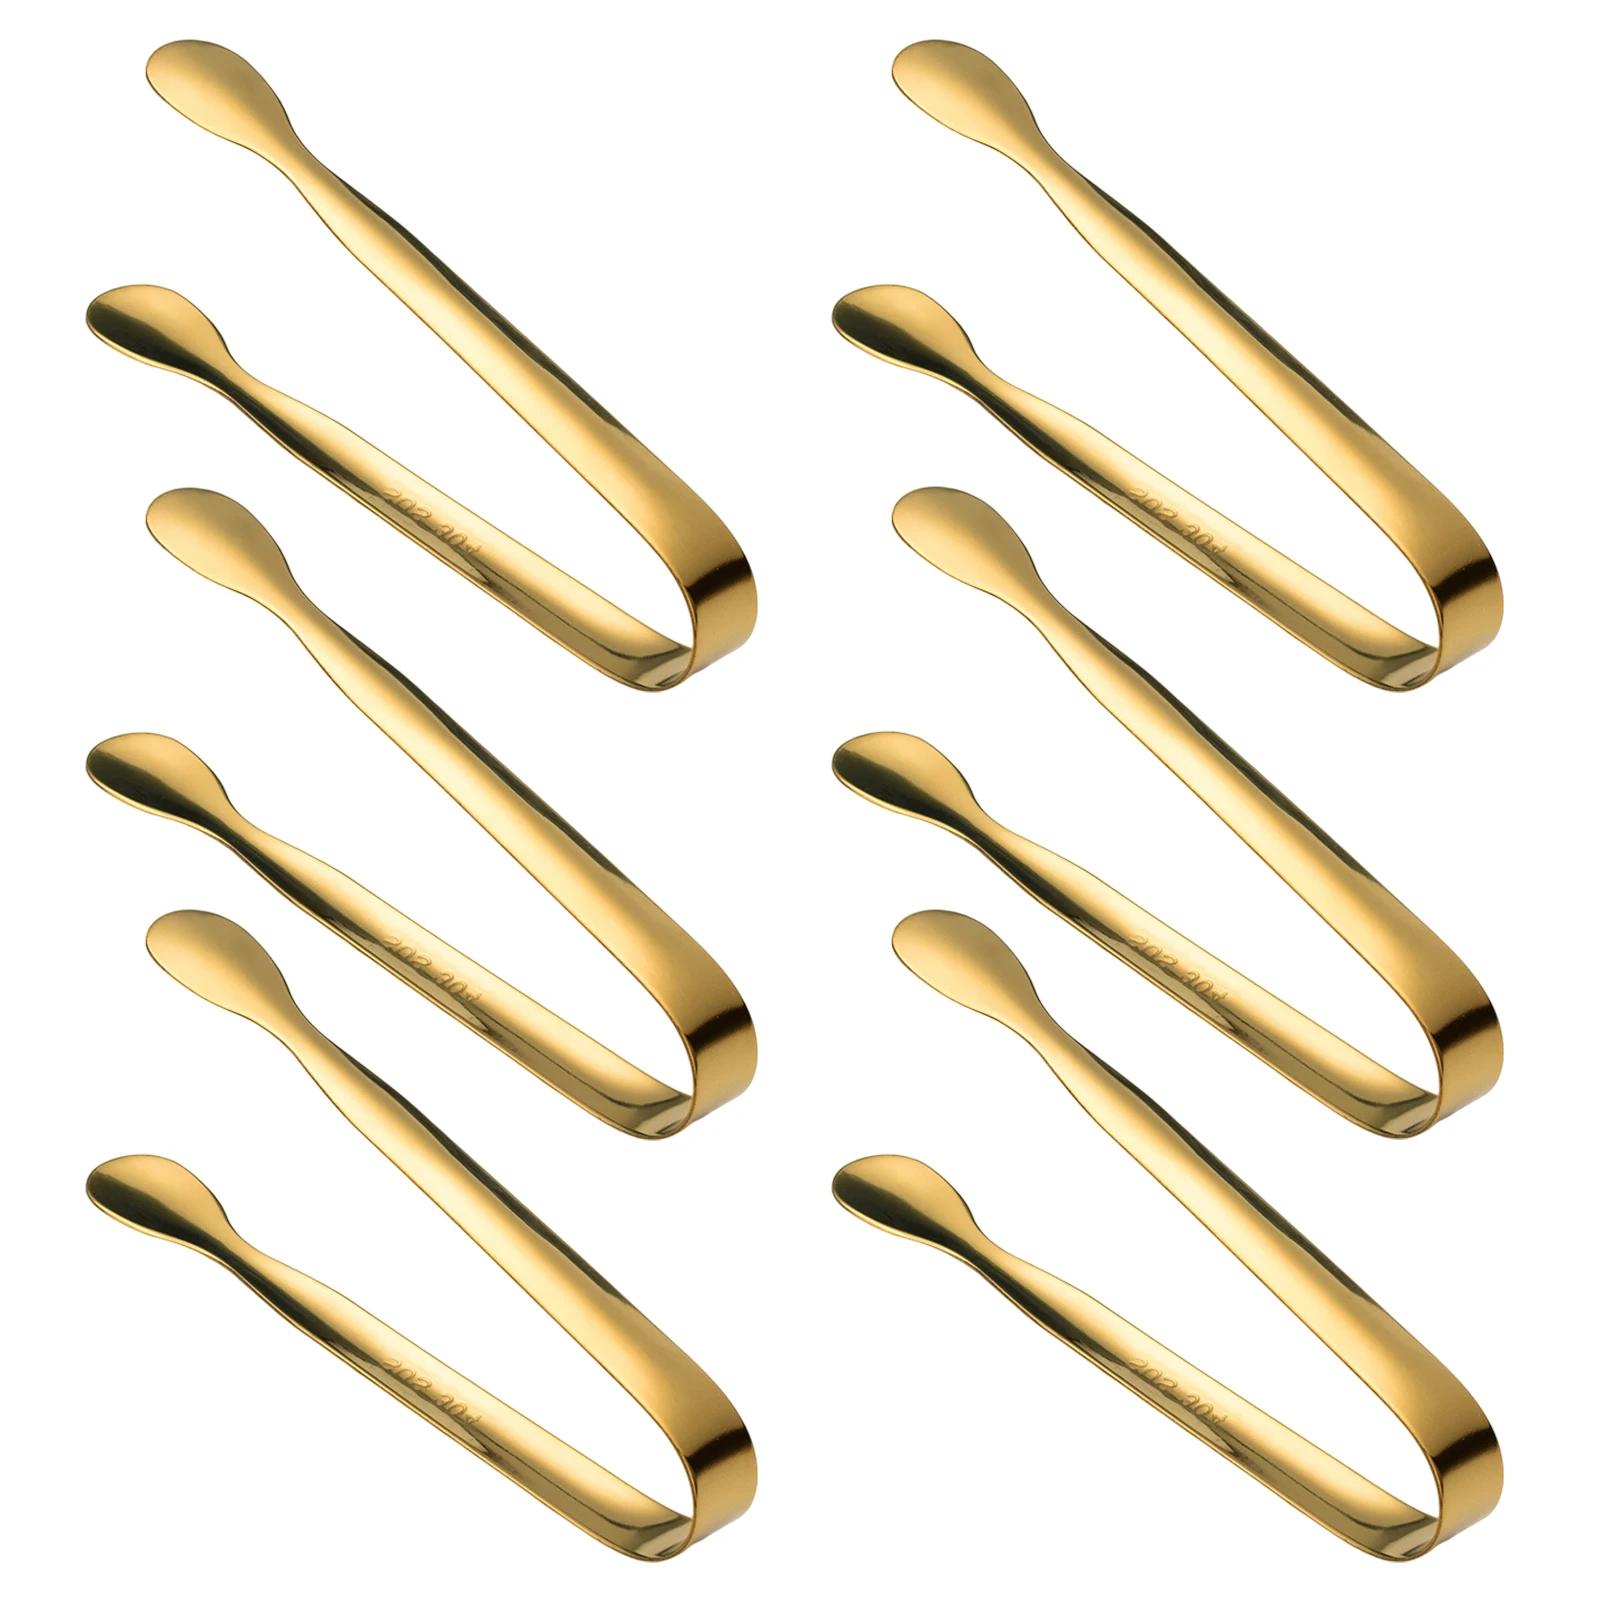 

6pcs Food Serving Small Multipurpose Gold Stainless Steel Ice Tongs Kitchen Utensils Parties Anti Slip Smooth Handle Rust Proof